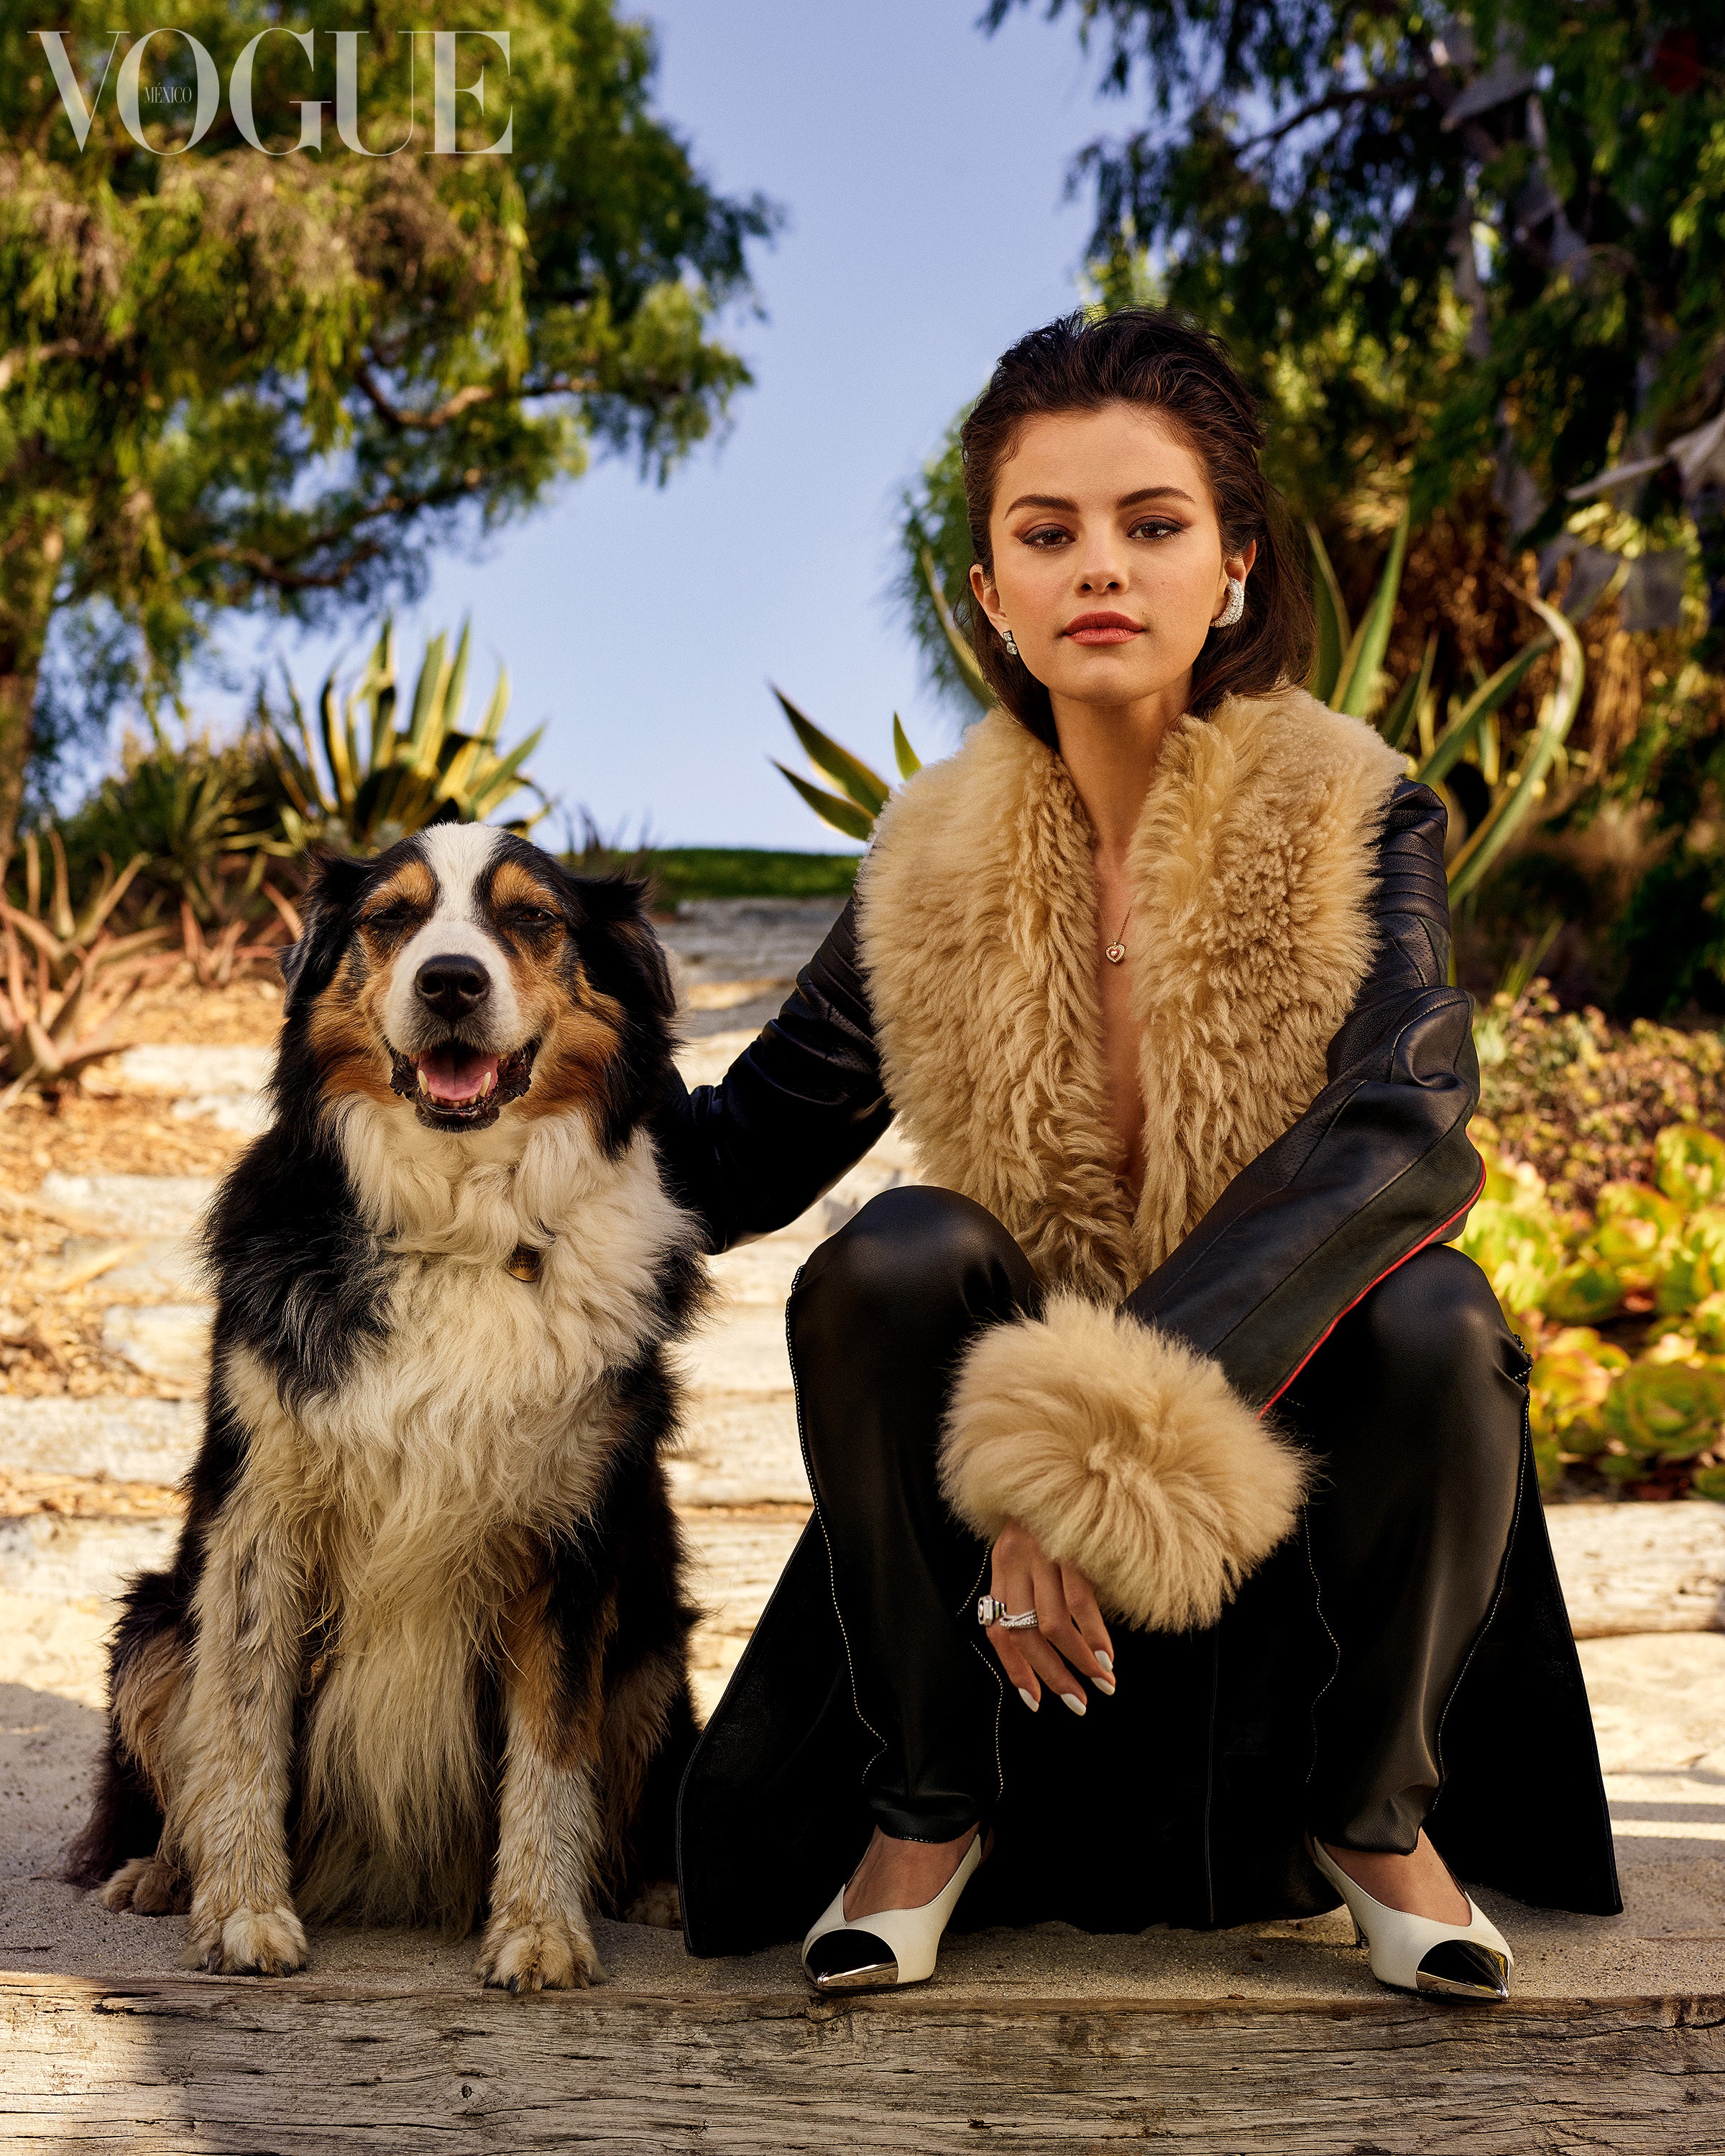 Photos n°1 : Selena Gomez in Mexico with a Dog!